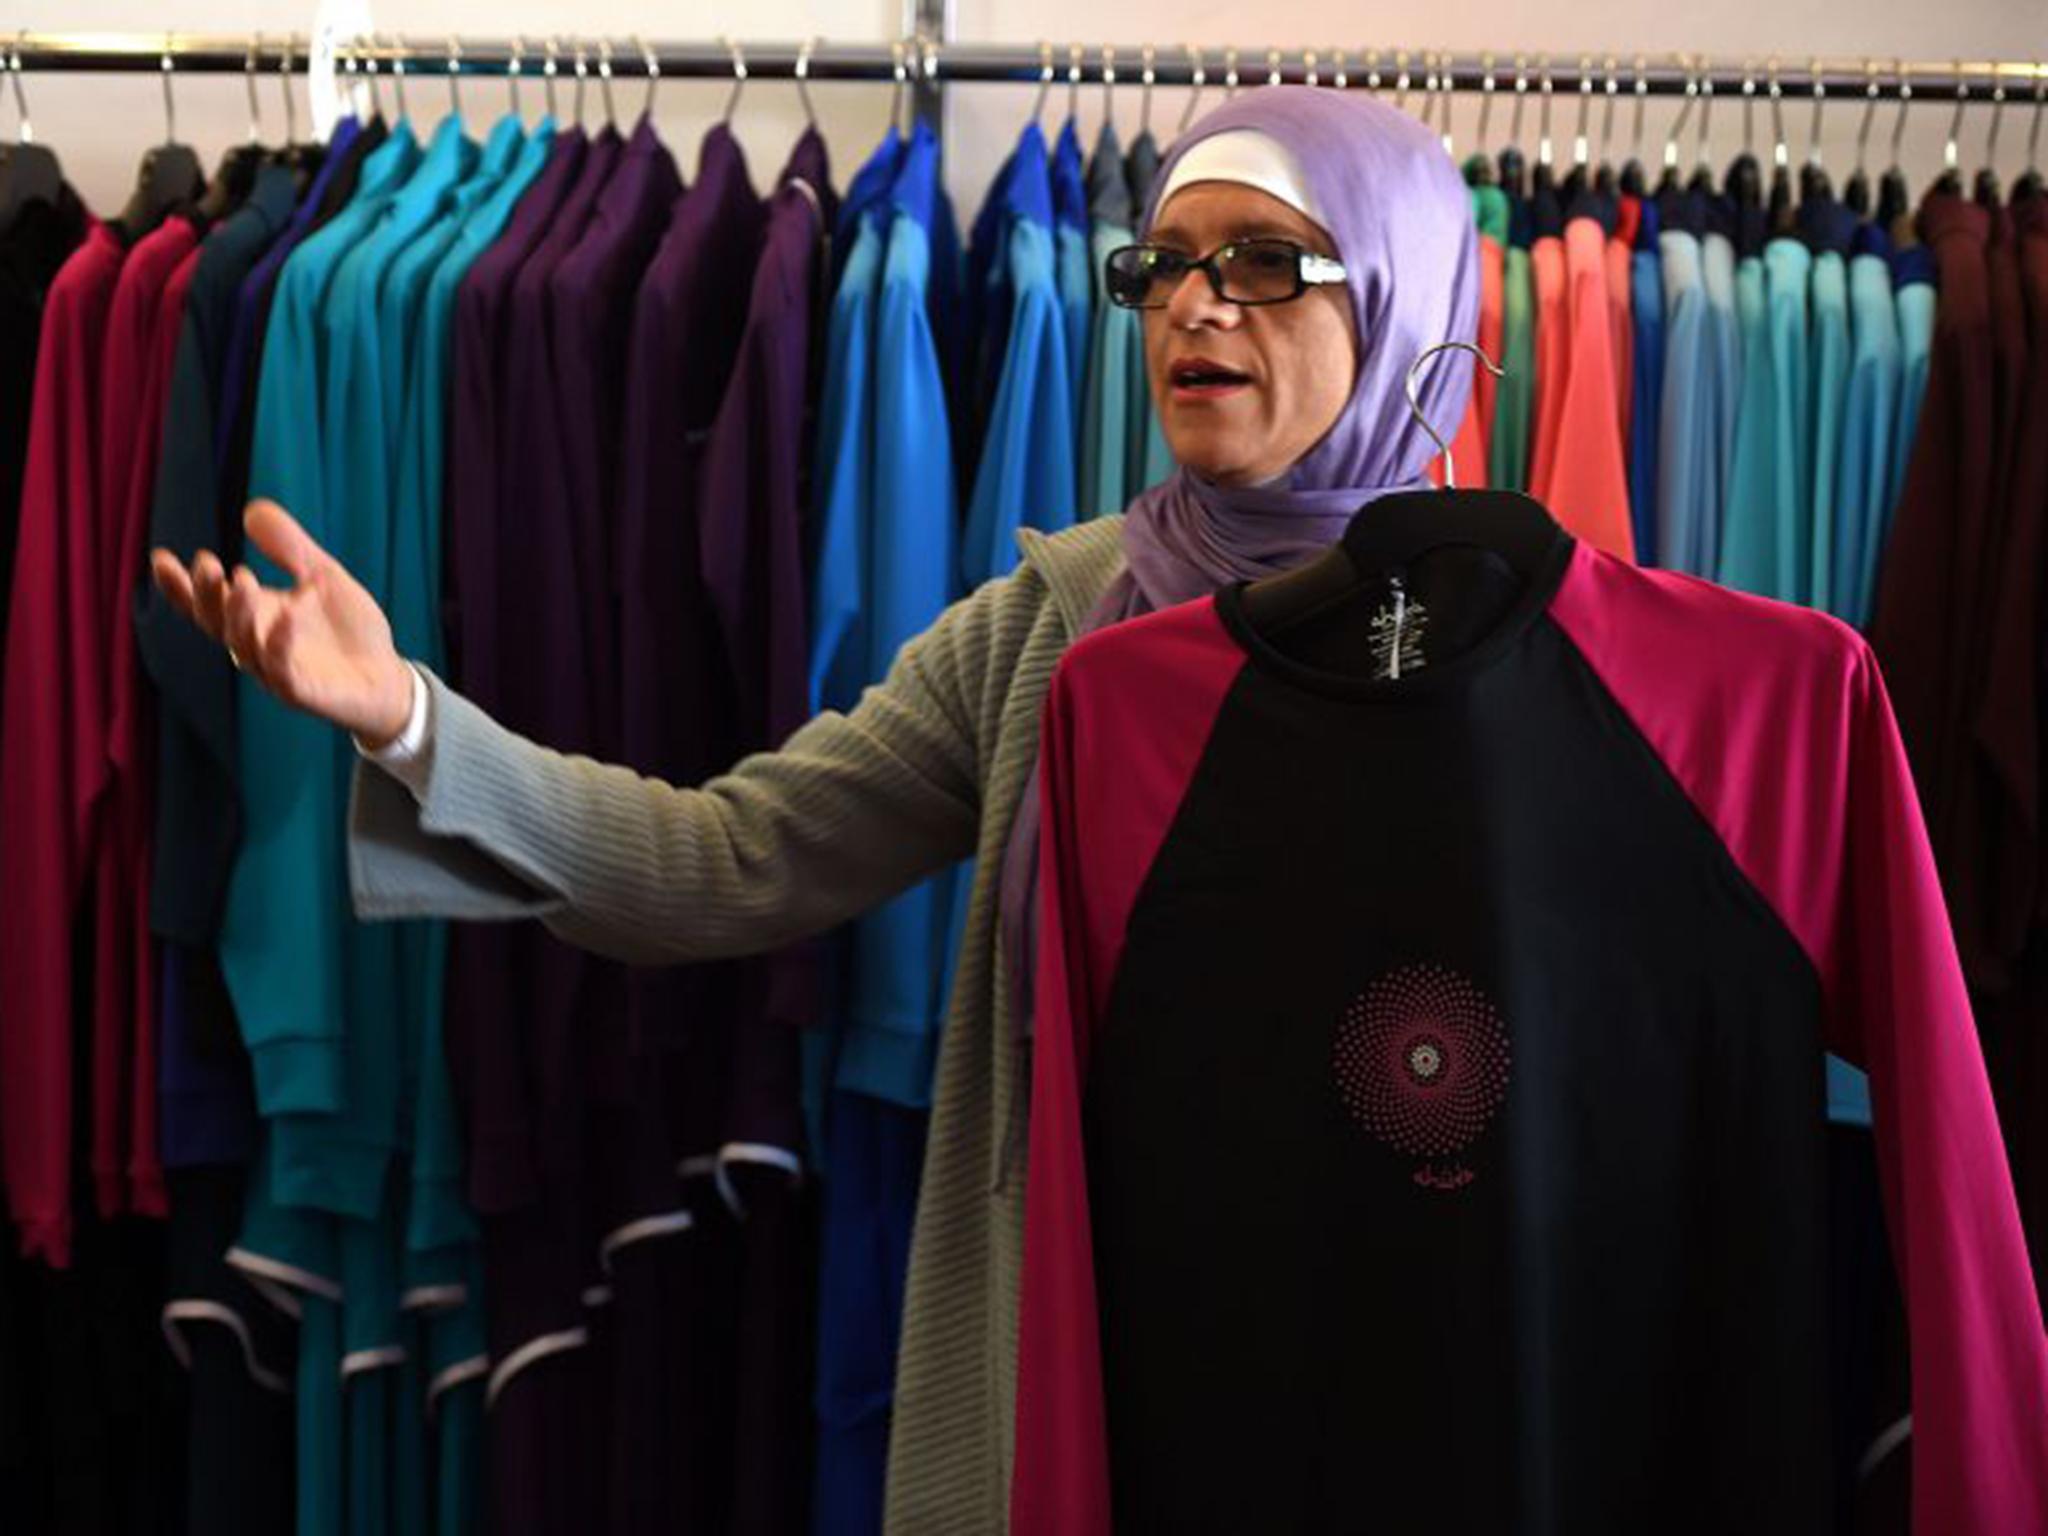 Australian-Lebanese designer Aheda Zanetti explains her products of burkini swimsuits at a shop in western Sydney